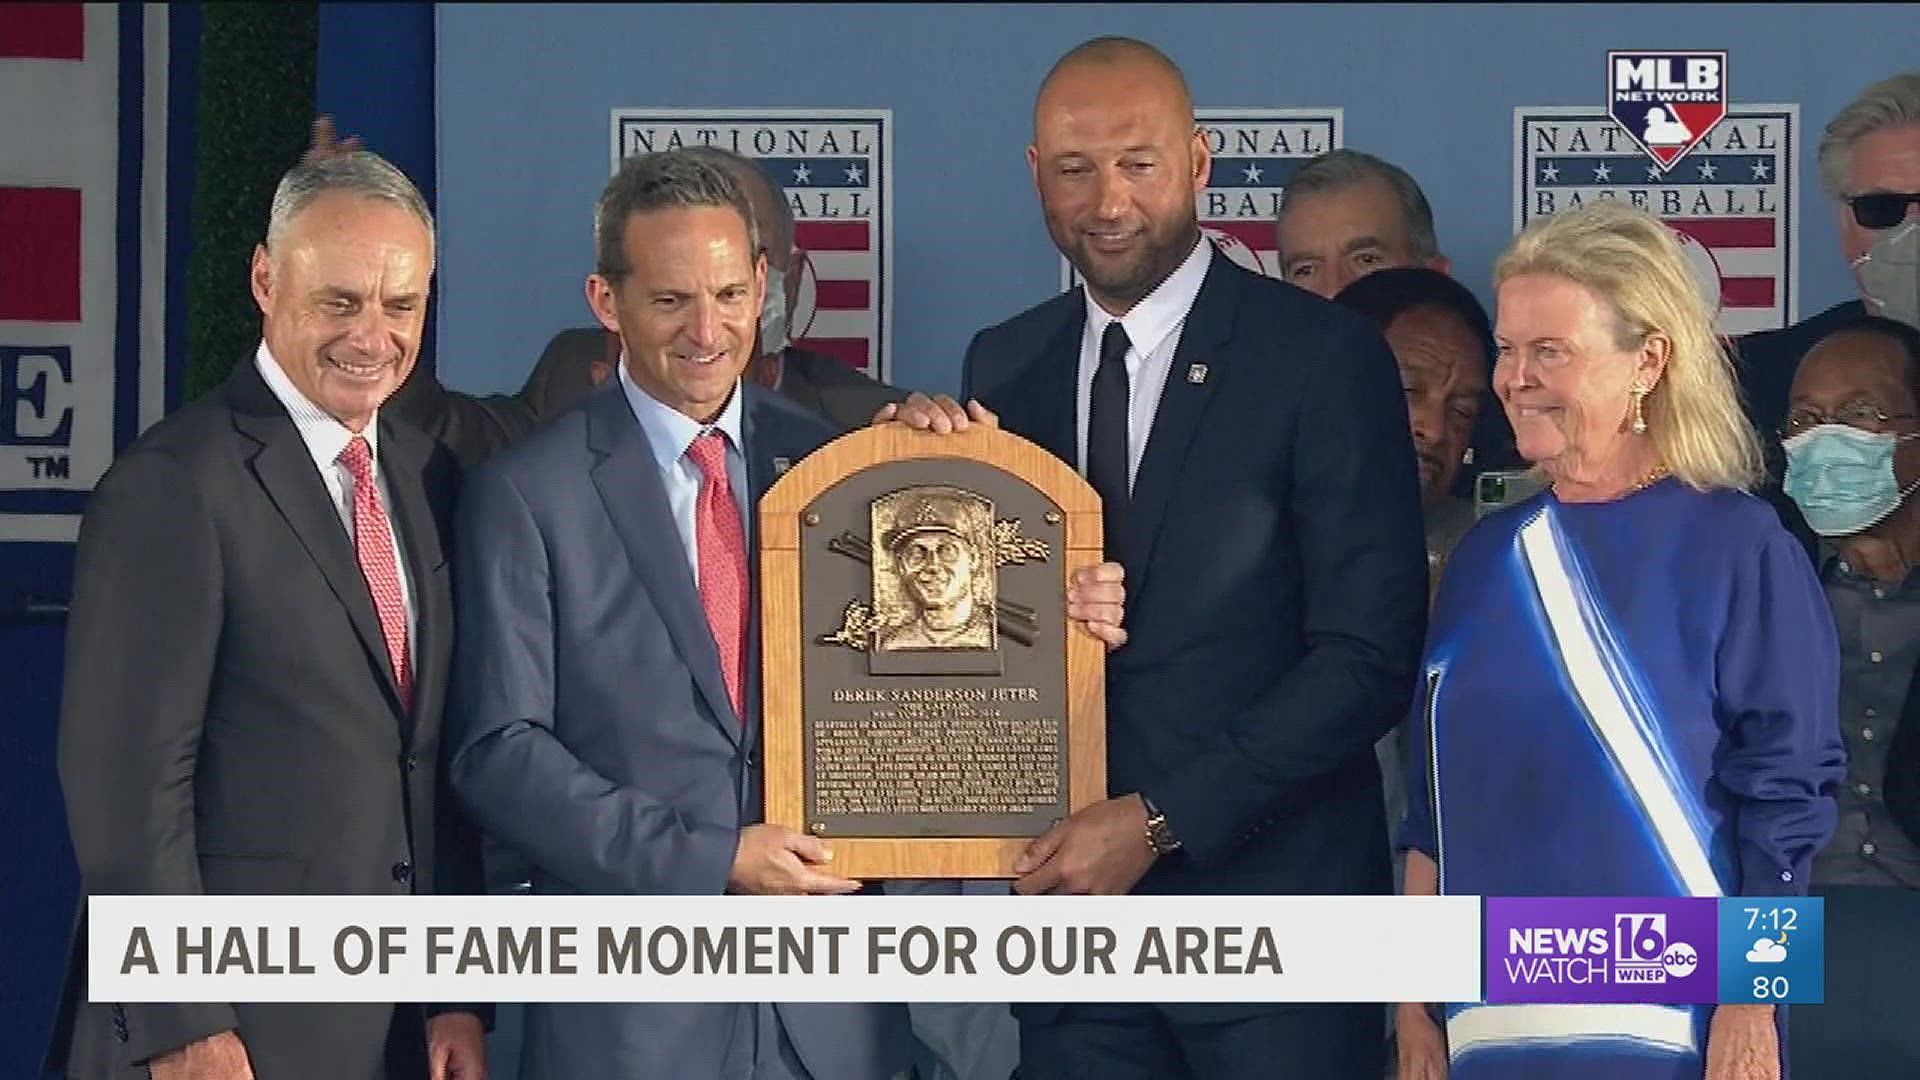 The Baseball Hall of Fame inducted four new members of the class of 2020 in Cooperstown, that included former New York Yankees captain, Derek Jeter.